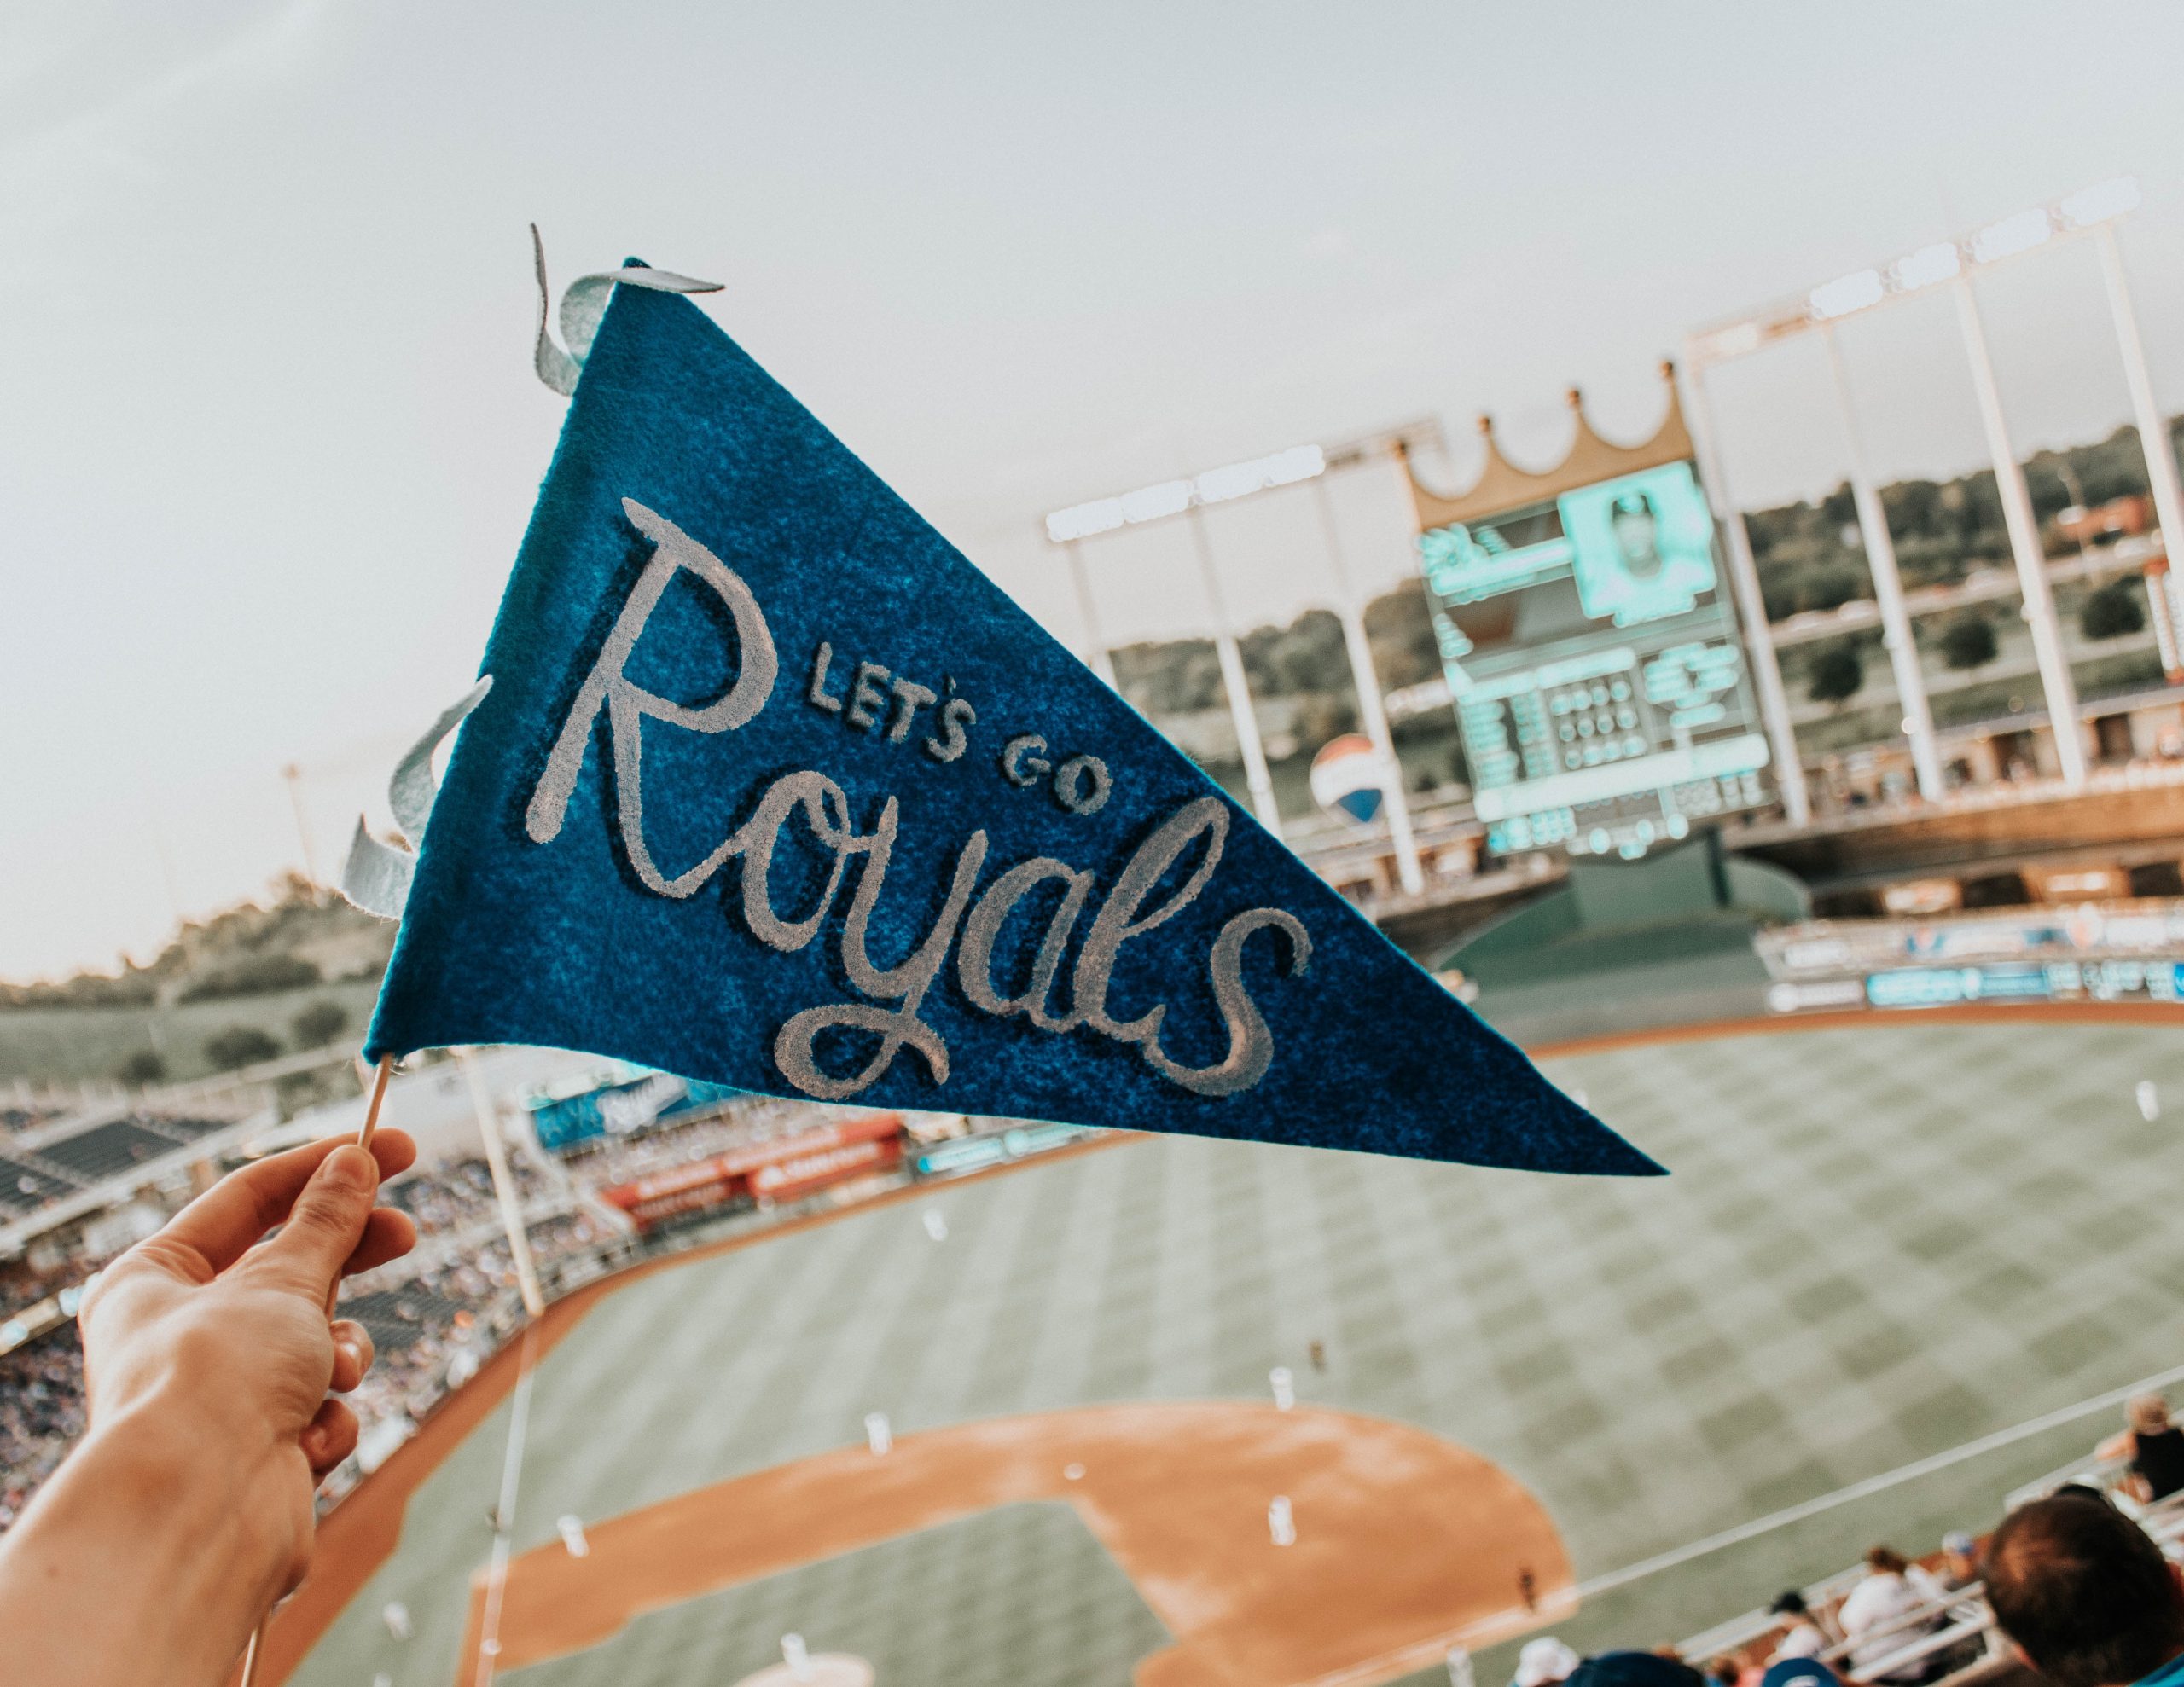 Picture of a banner that says "Let's Go Royals" with the baseball field in Kauffman Stadium in the background.